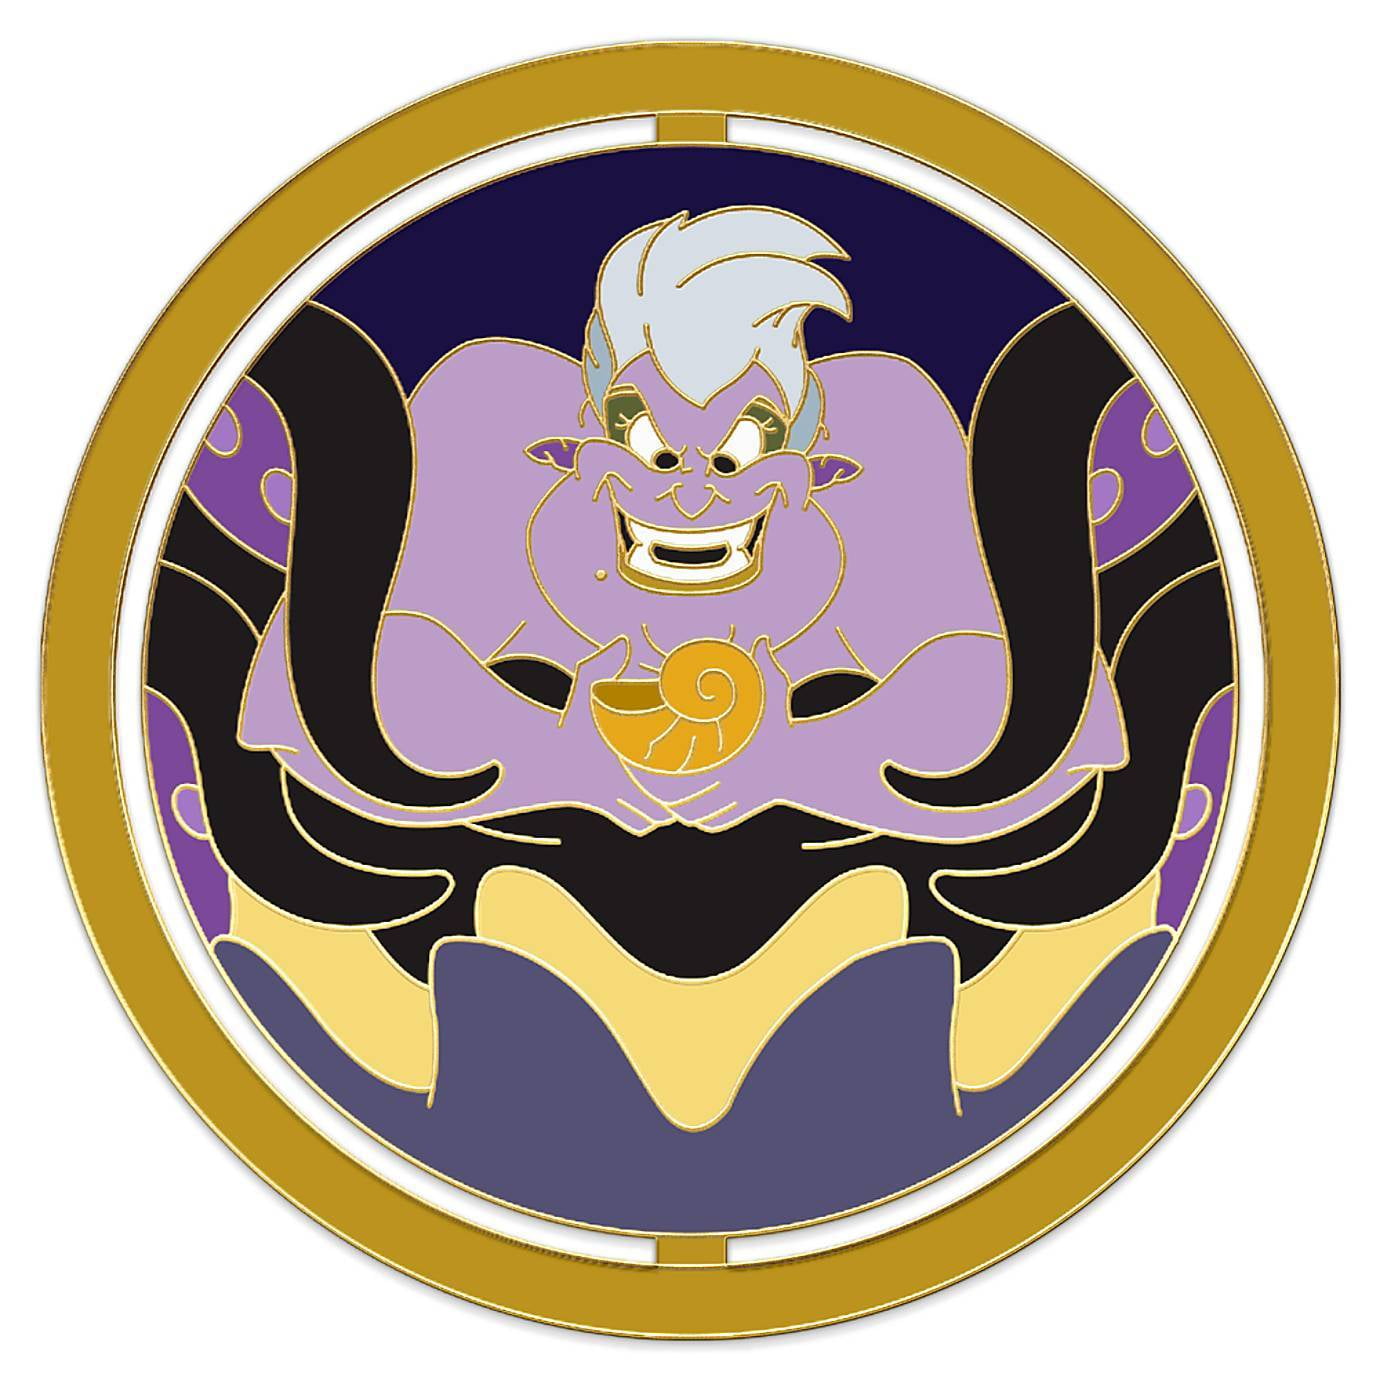 2020 Disney Booster Pin Neon Accents Villains Ursula from The Little Mermaid 